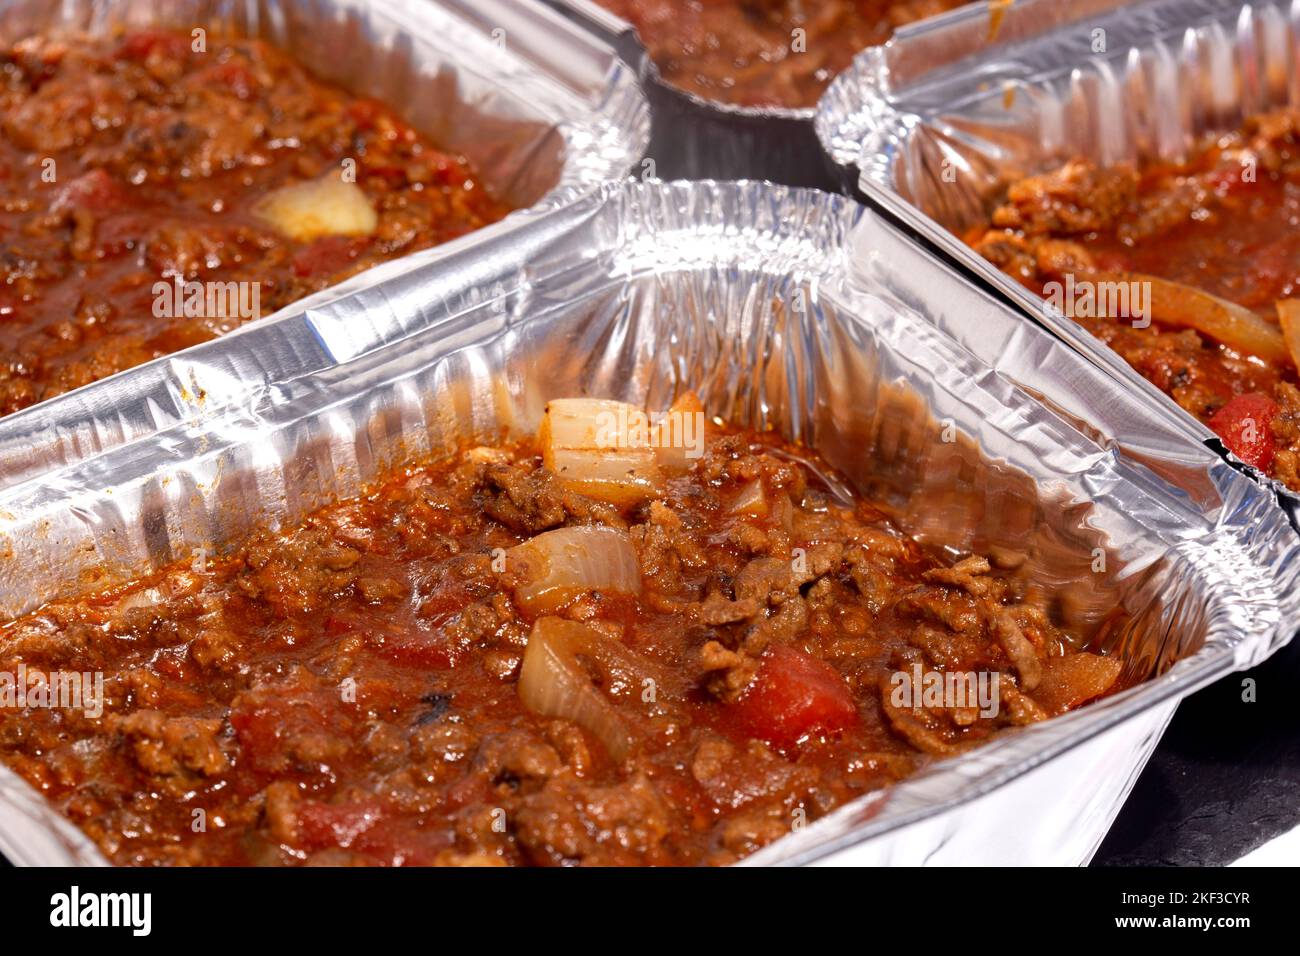 Homemade bolognese sauce filled in individual foil trays ready for freezing. Ideas for cutting the cost of food. Stock Photo